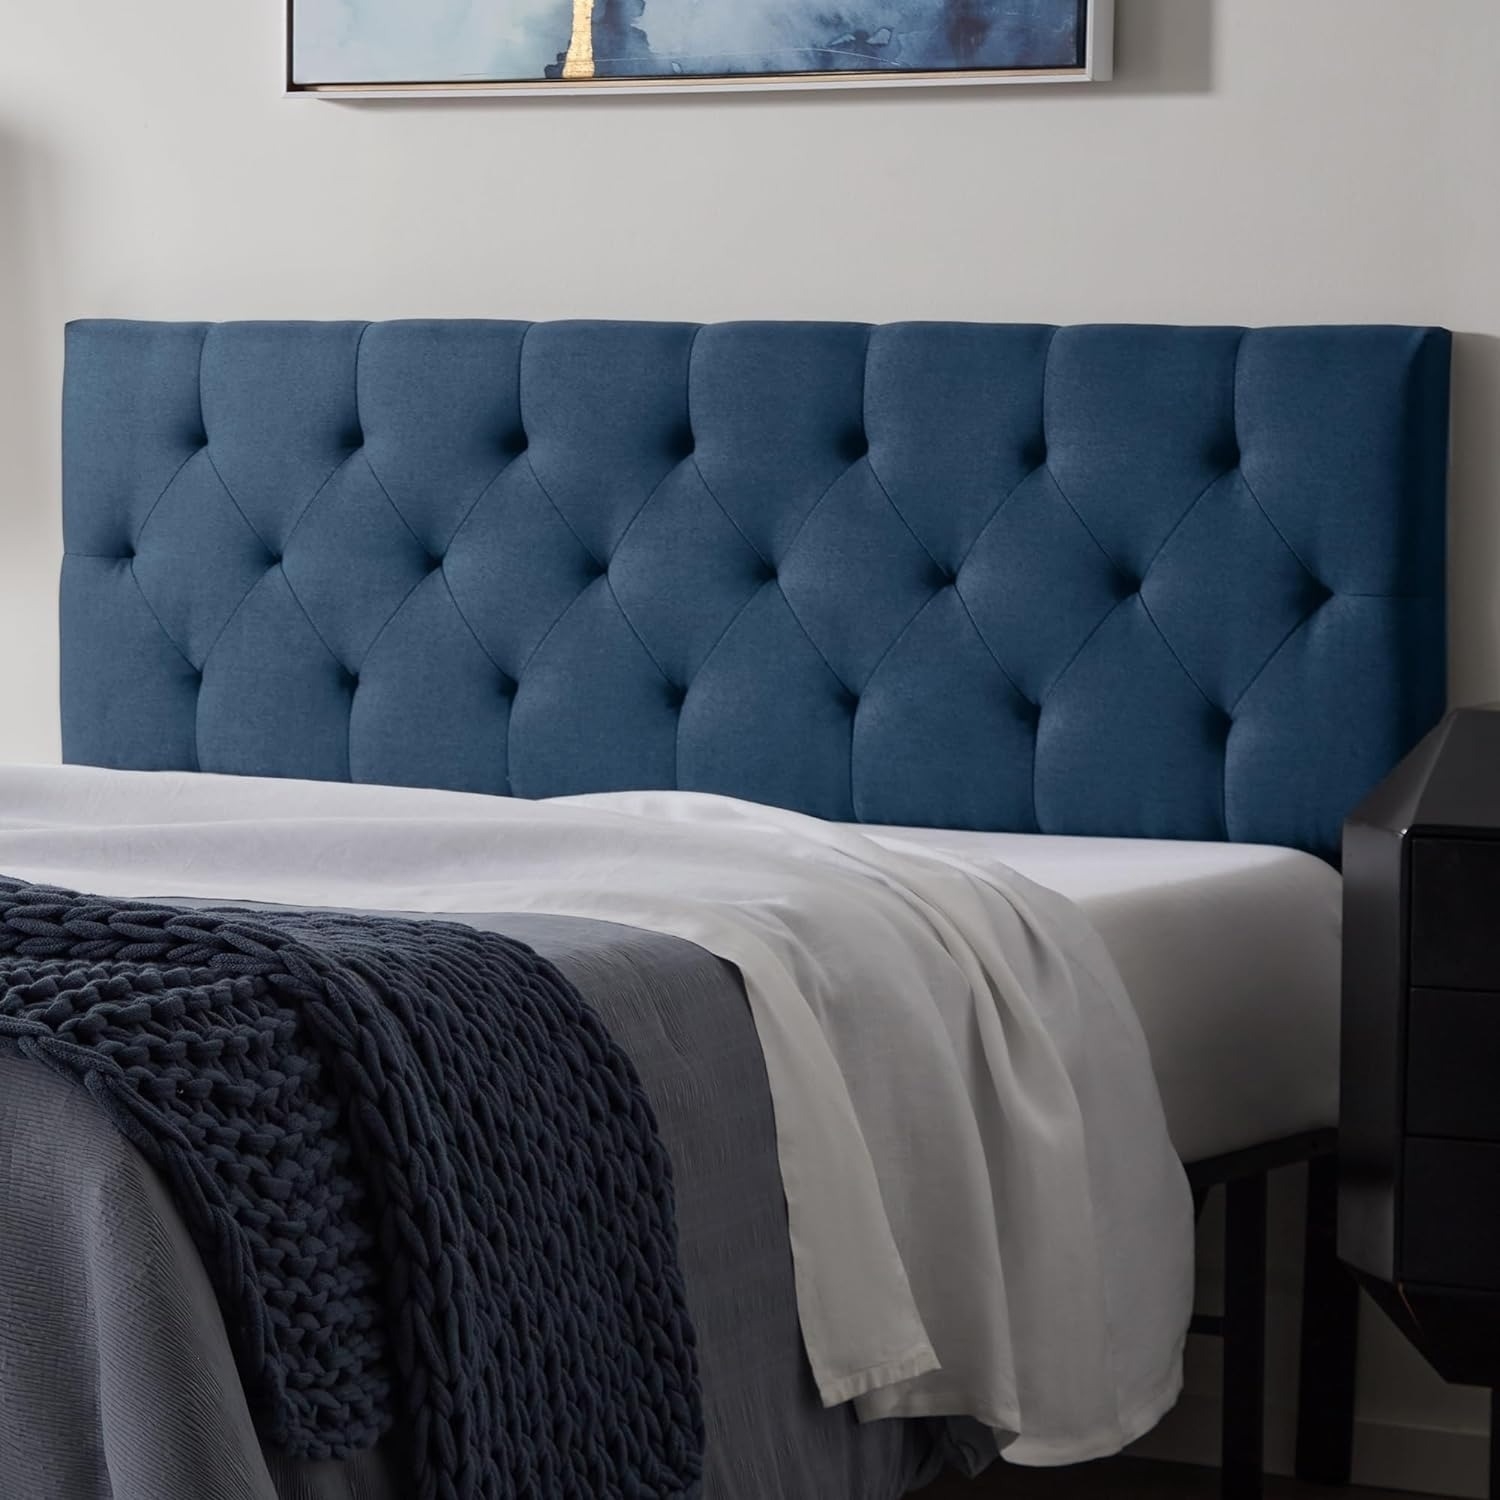 Tufted navy headboard with a diamond pattern in a bedroom setting